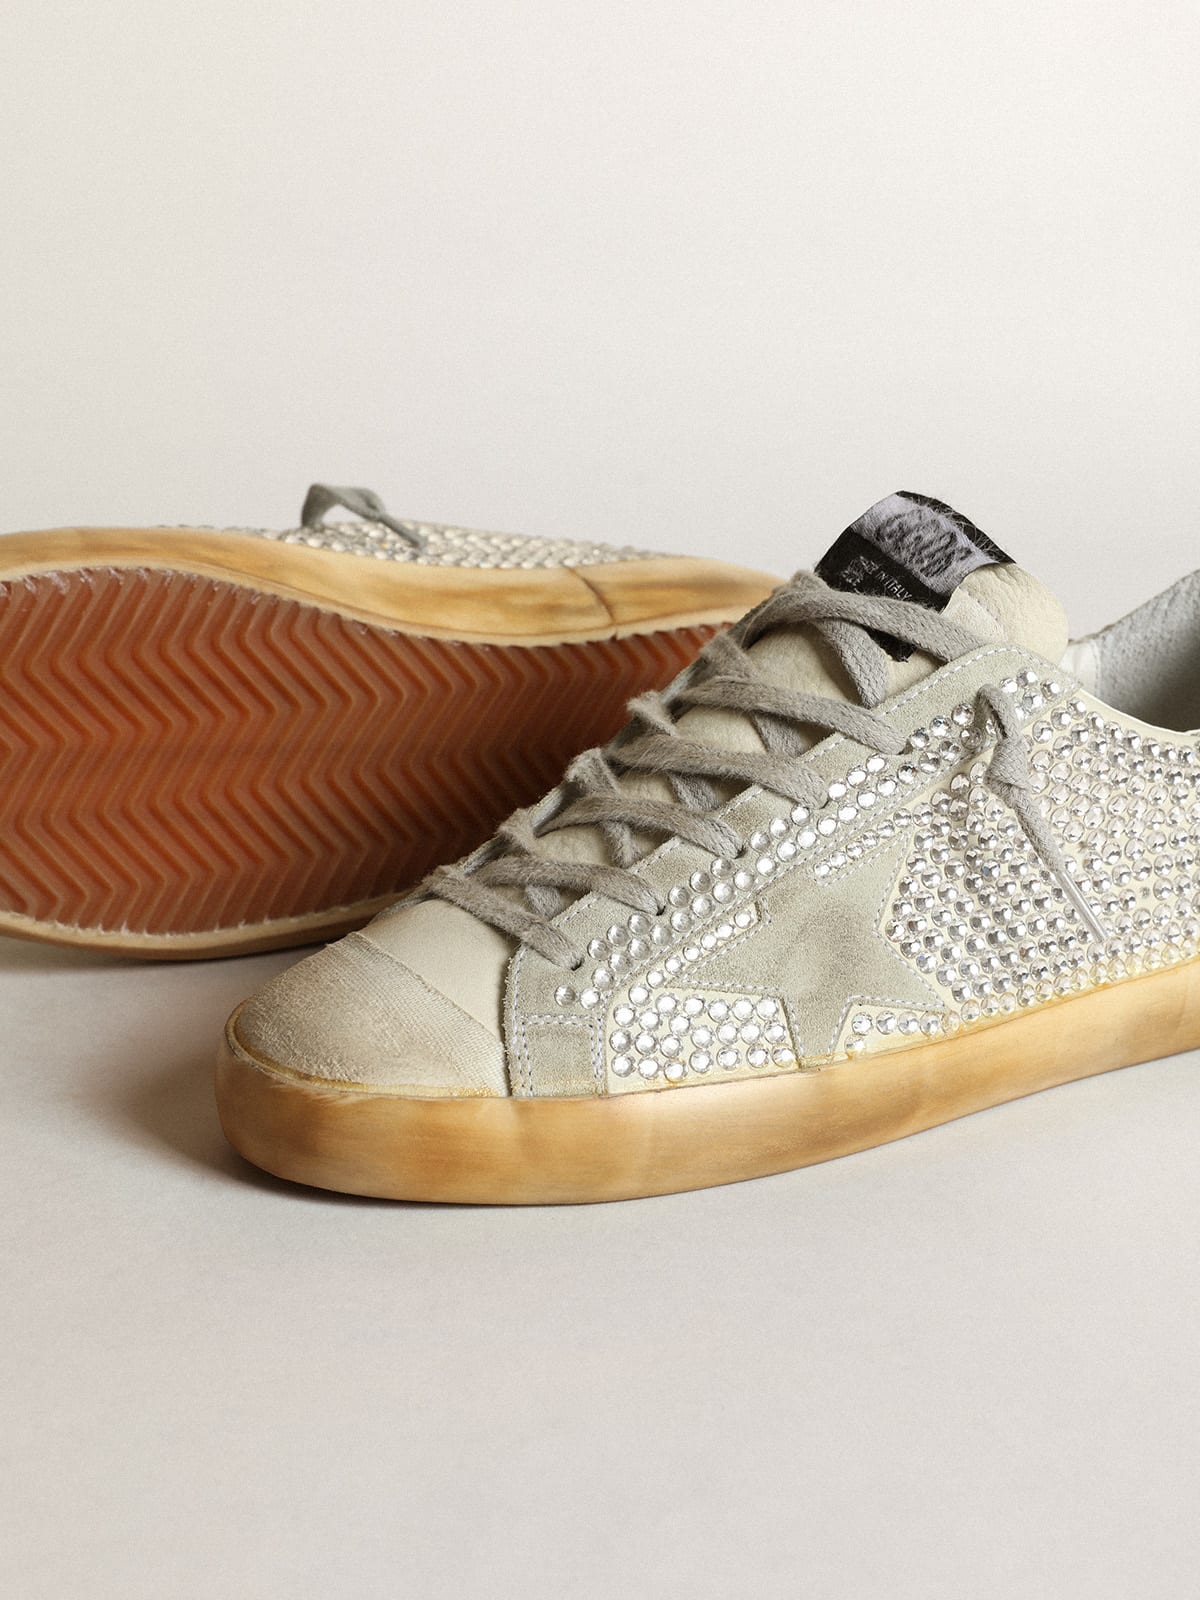 Golden Goose - Women's Super-Star in off-white nubuck and silver crystals in 